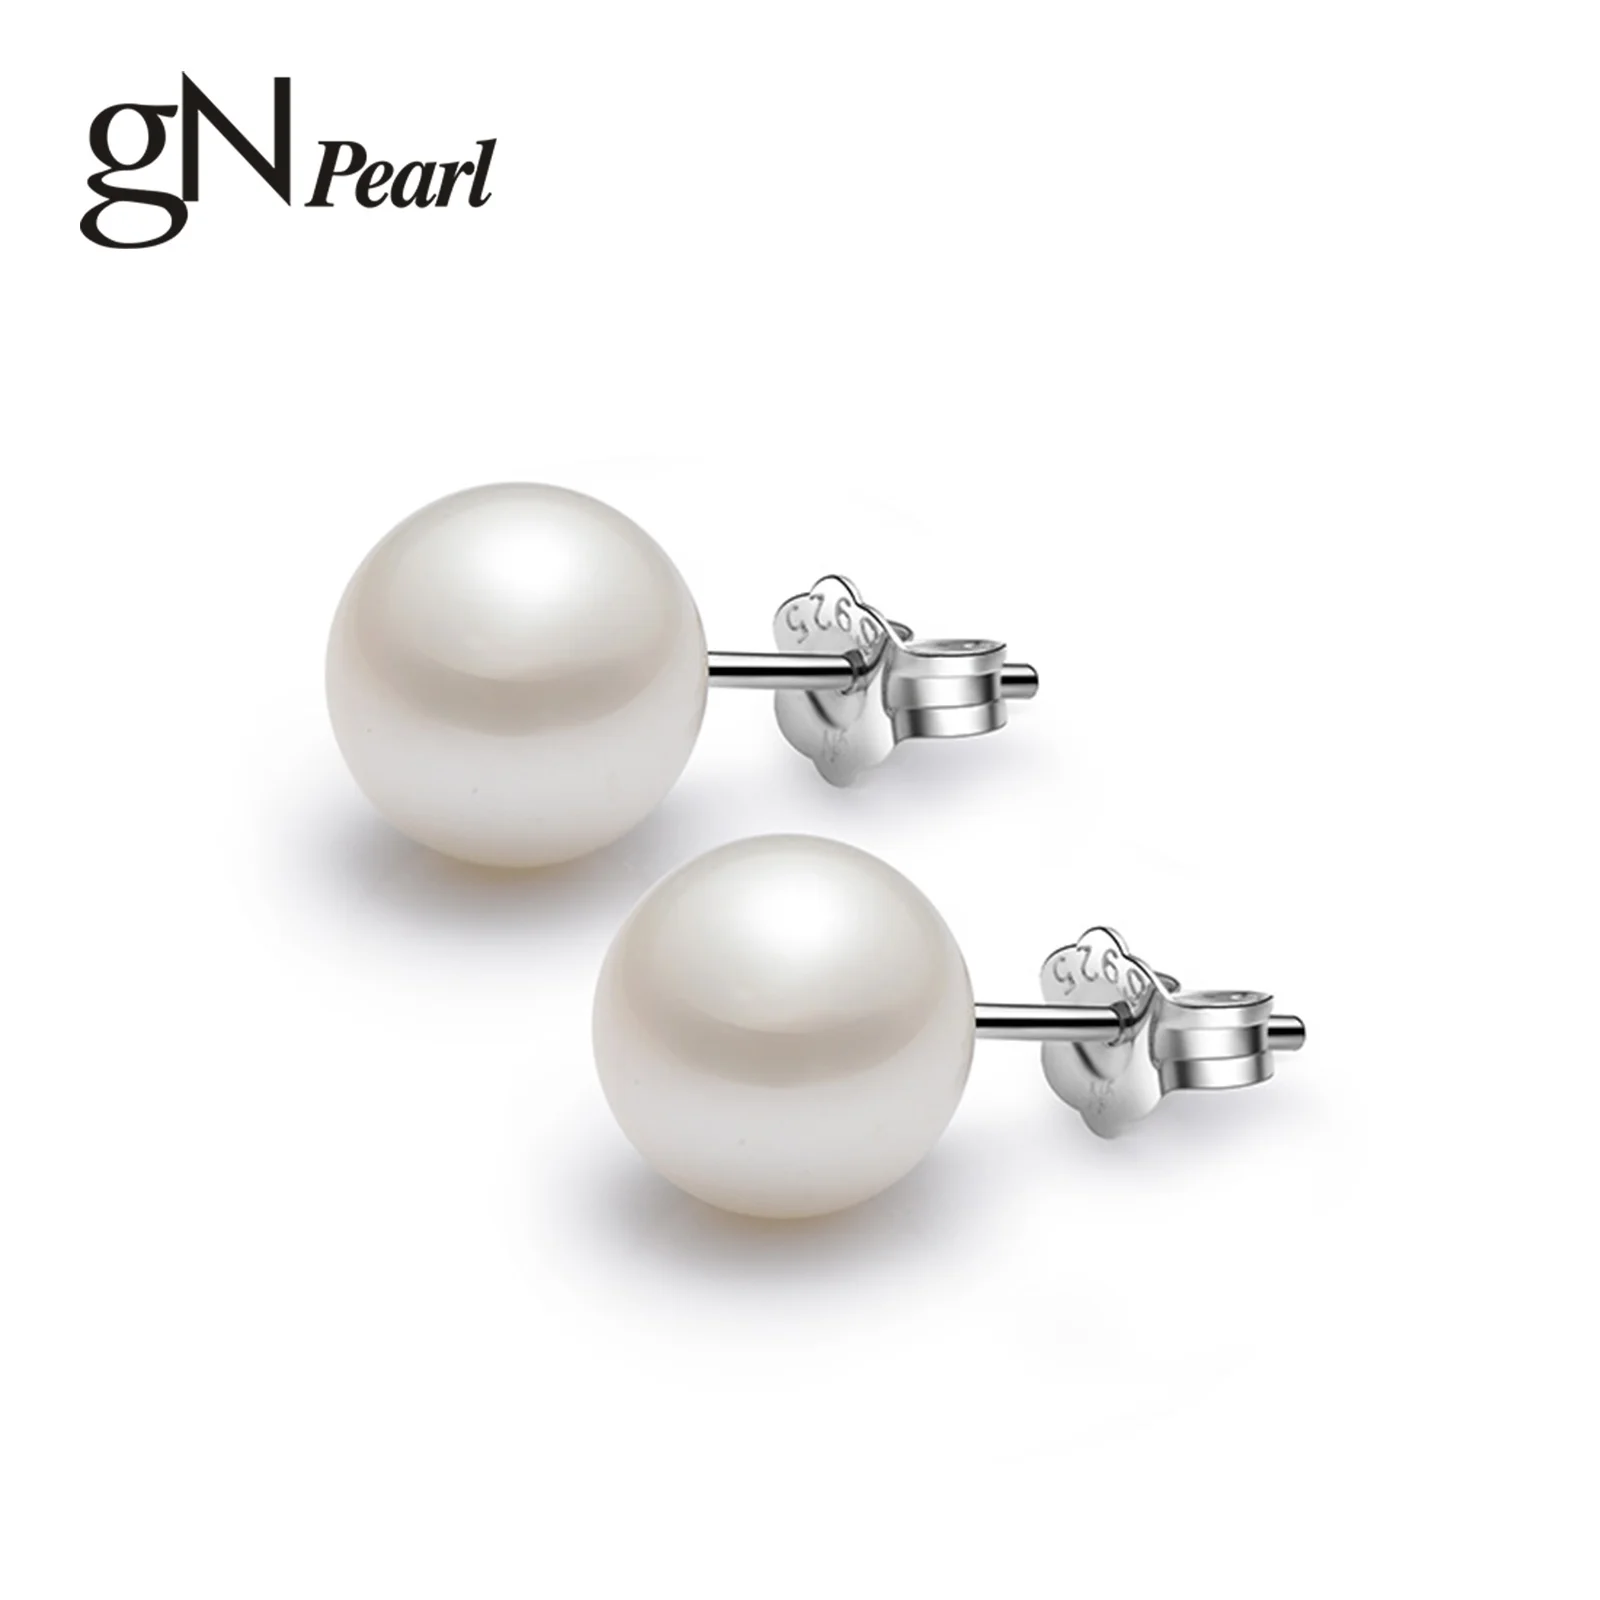 

gN Pear Classic Style Real 925 Sterling Silver Natural Freshwater Pearl Stud Earrings gNPearl Fine Jewelry for Women Wedding